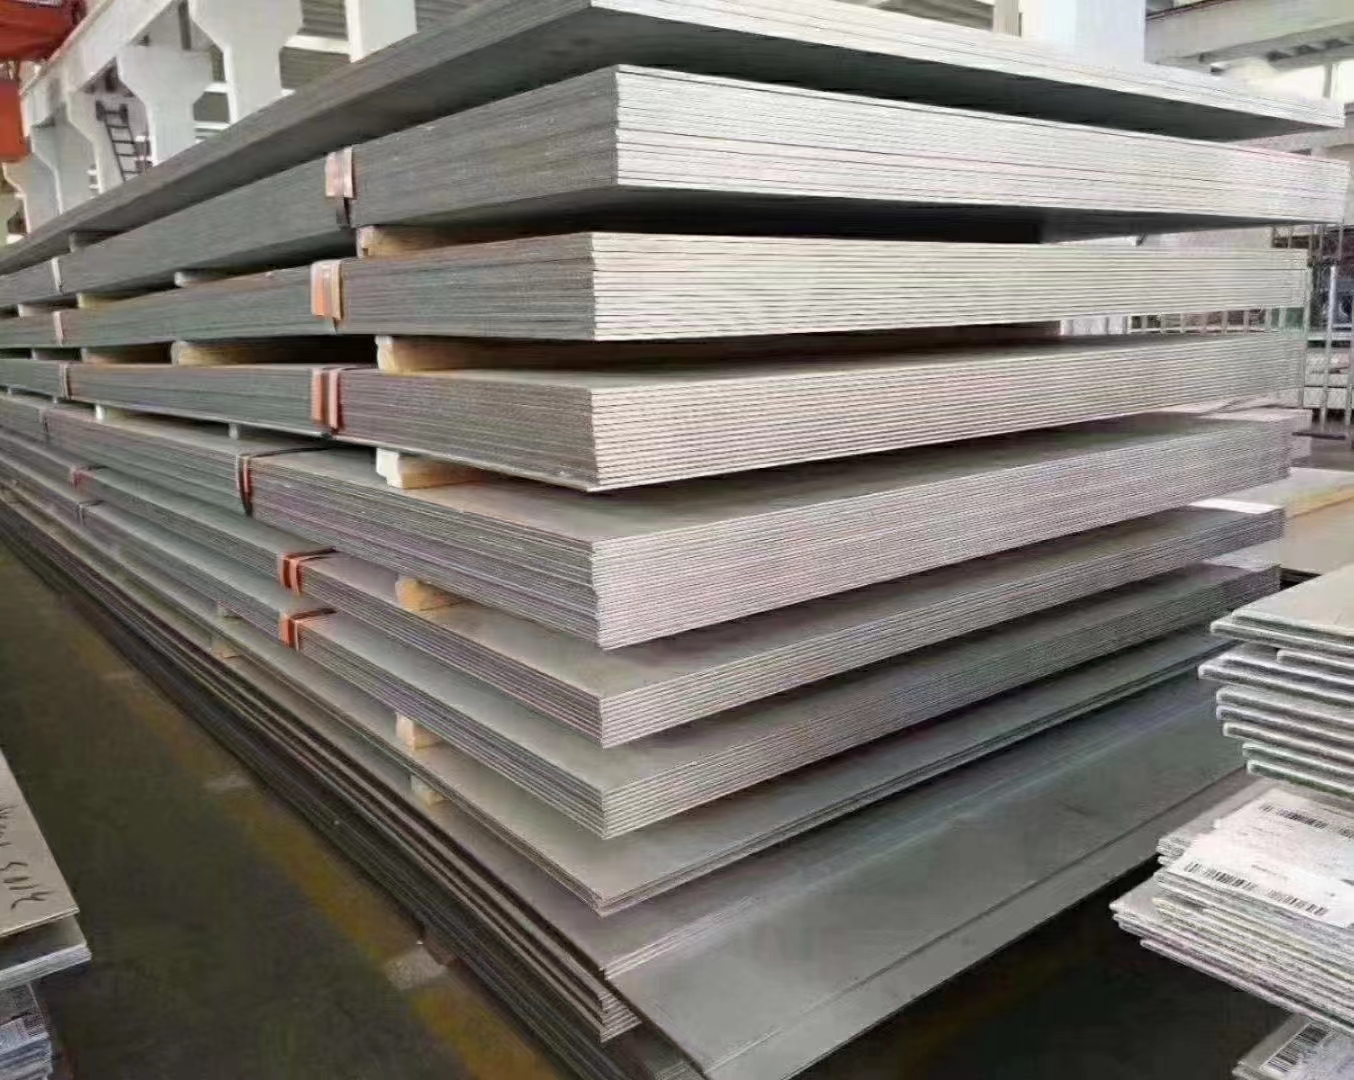 Hot Rolled Stainless Steel Plate Manufacturers Stainless Steel Plate Processing 201 304 316 316L 